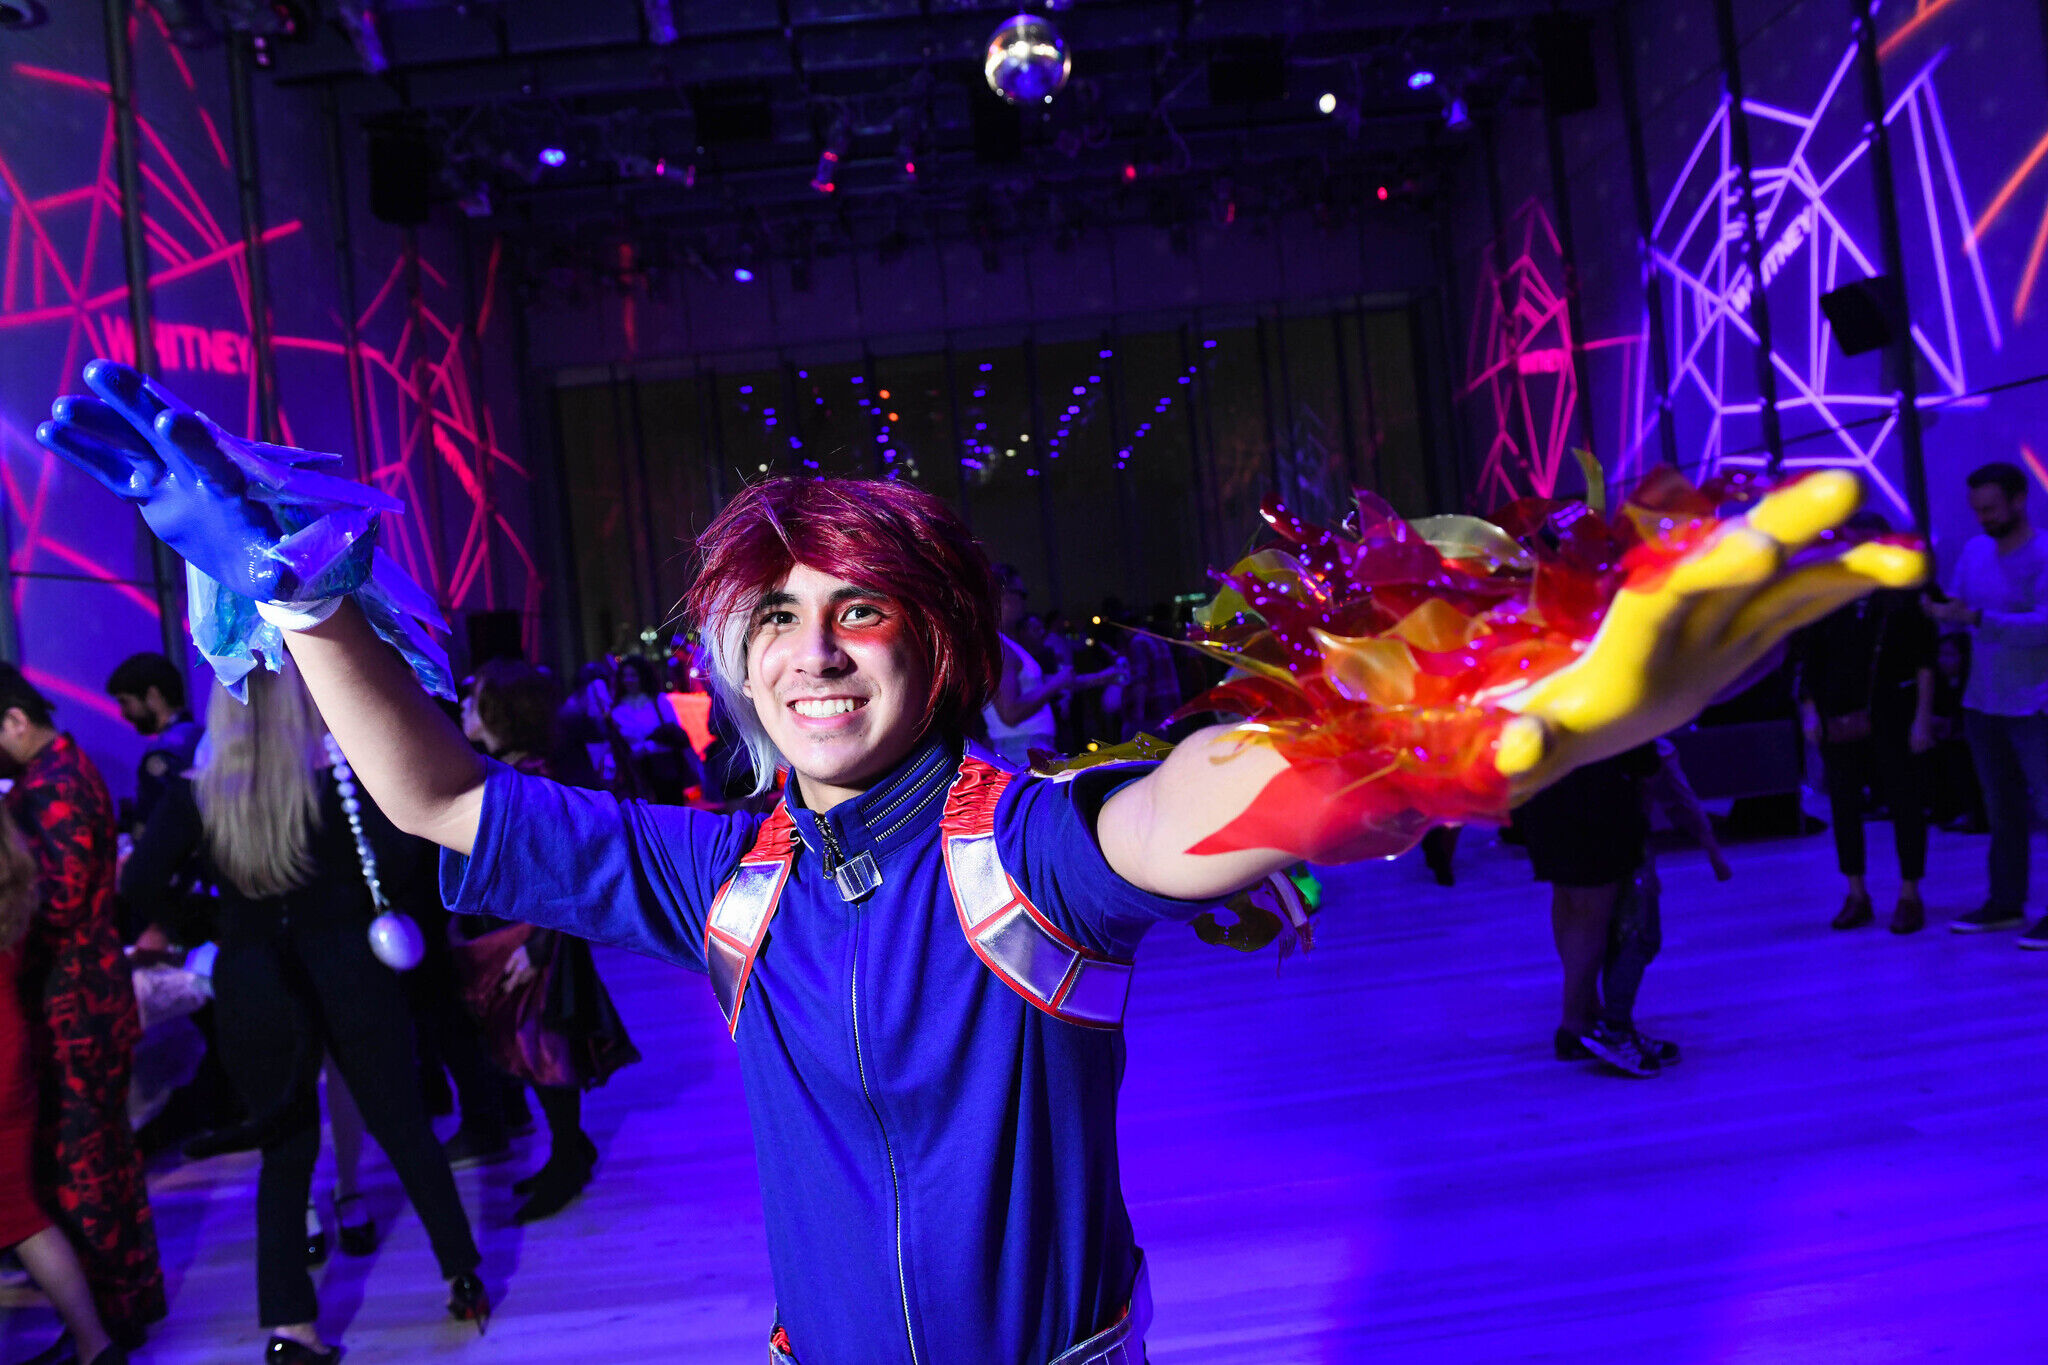 Person dressed up in costume with a right glove depicting water and left glove depicting fire. There is a disco ball on the ceiling and spiderweb shapes projected onto the walls of the room. There is a group of people in the background.